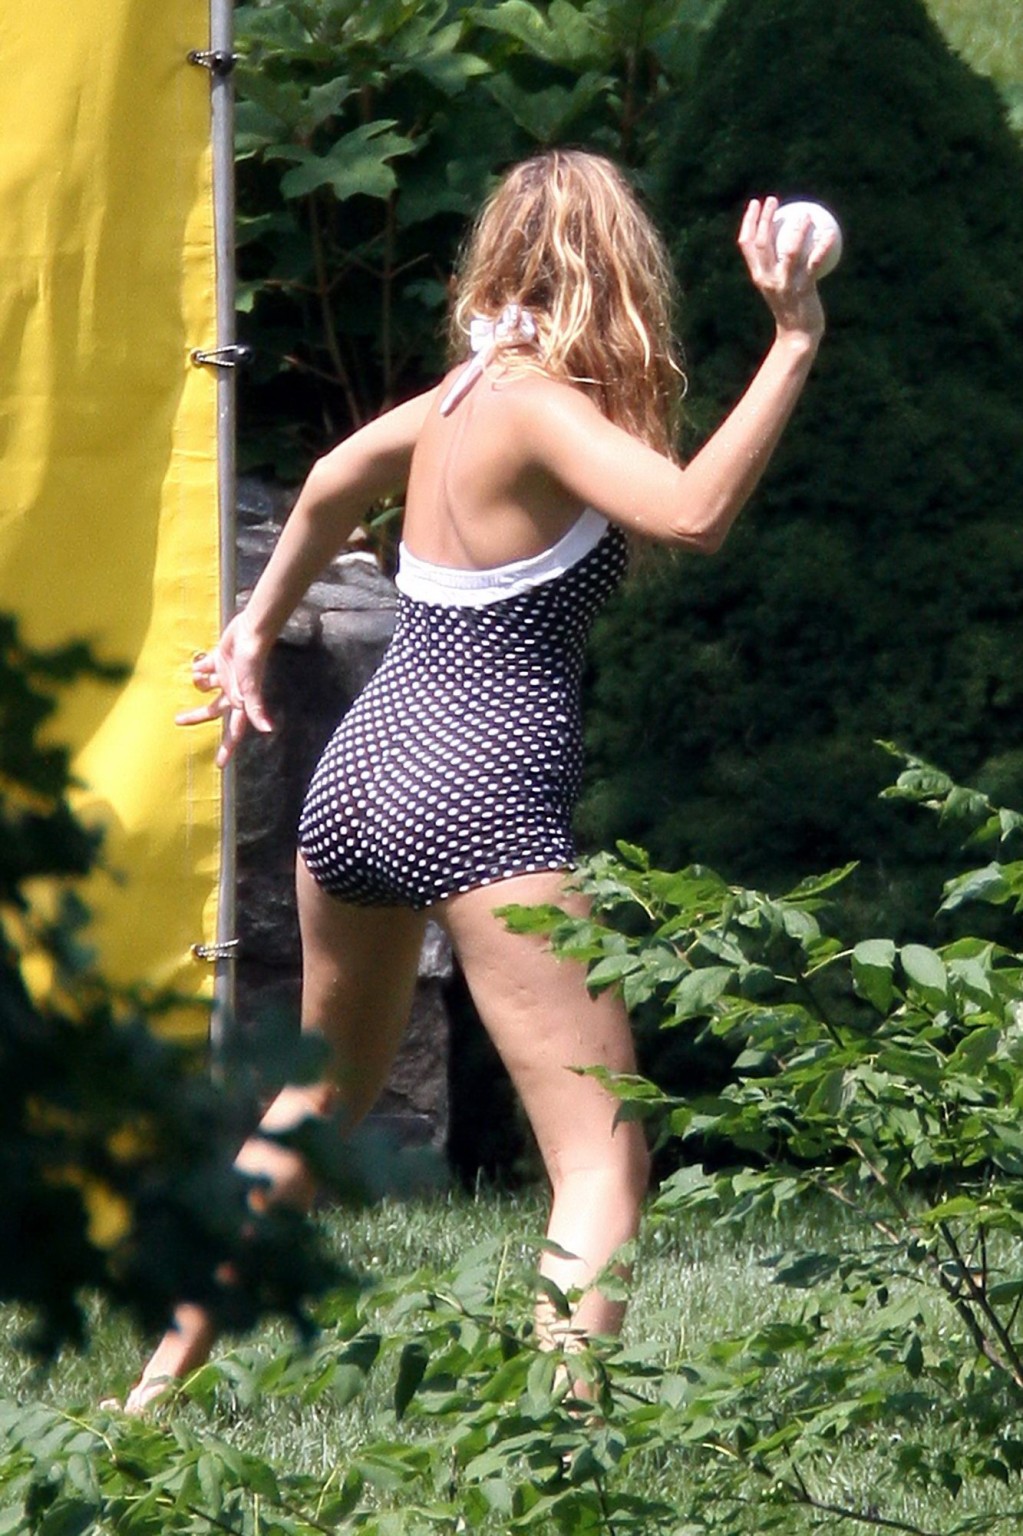 Blake Lively showing her ass in polka dot monokini at the pool party in NYC #75257925